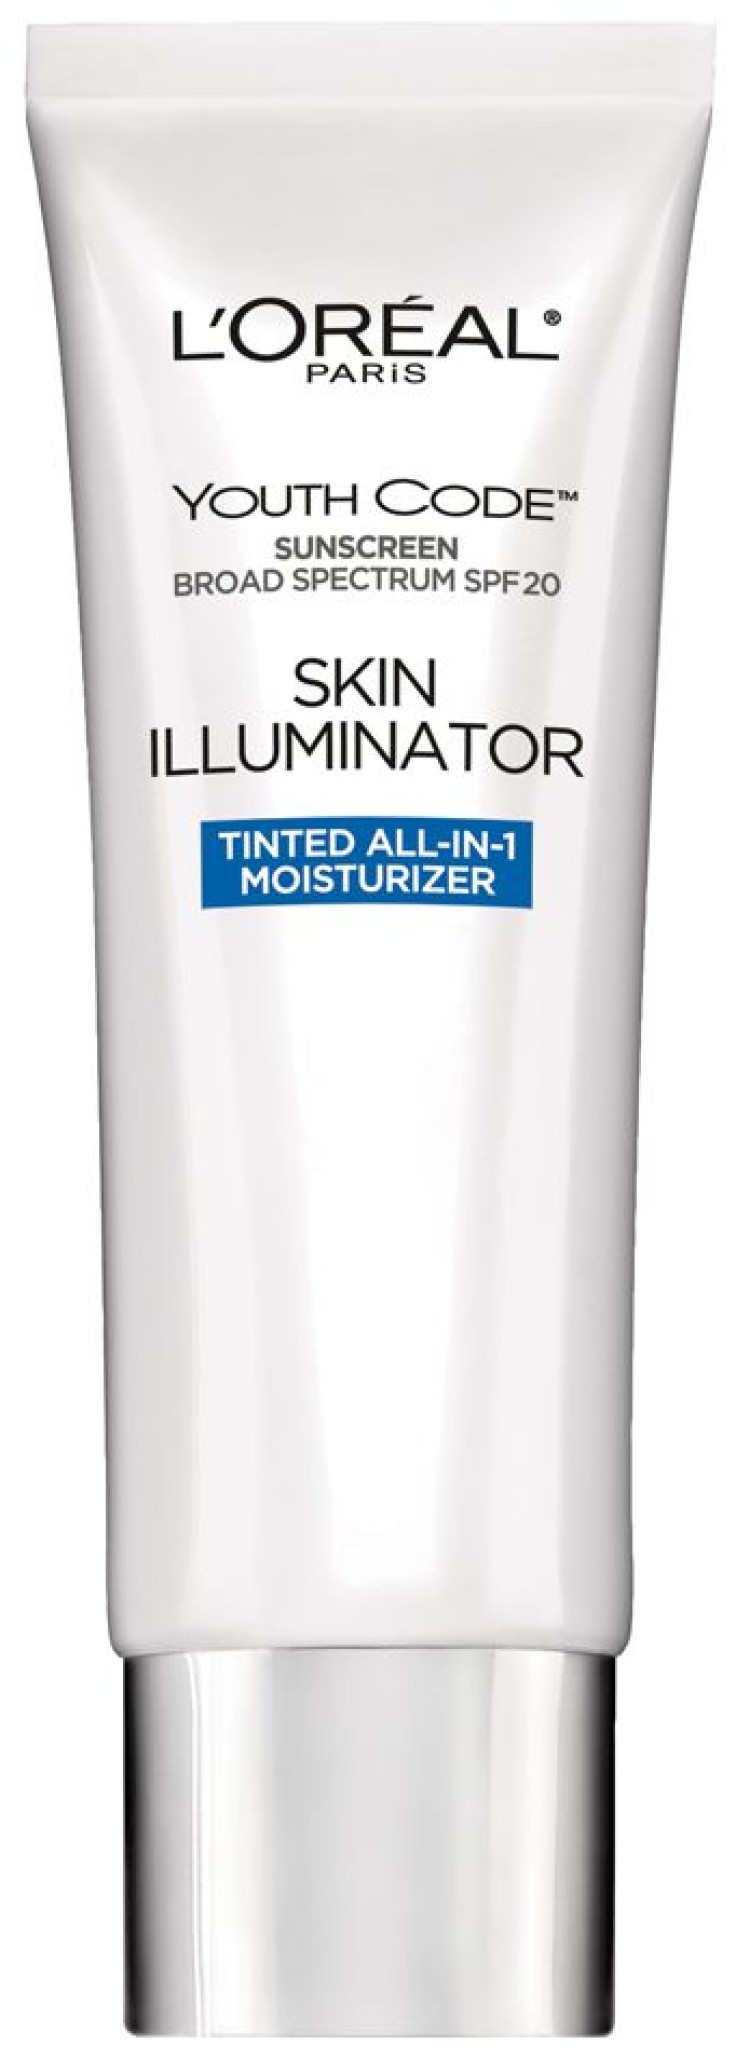 Youth Code Skin Illuminator All-In-1 Moisturizer - out of packaging